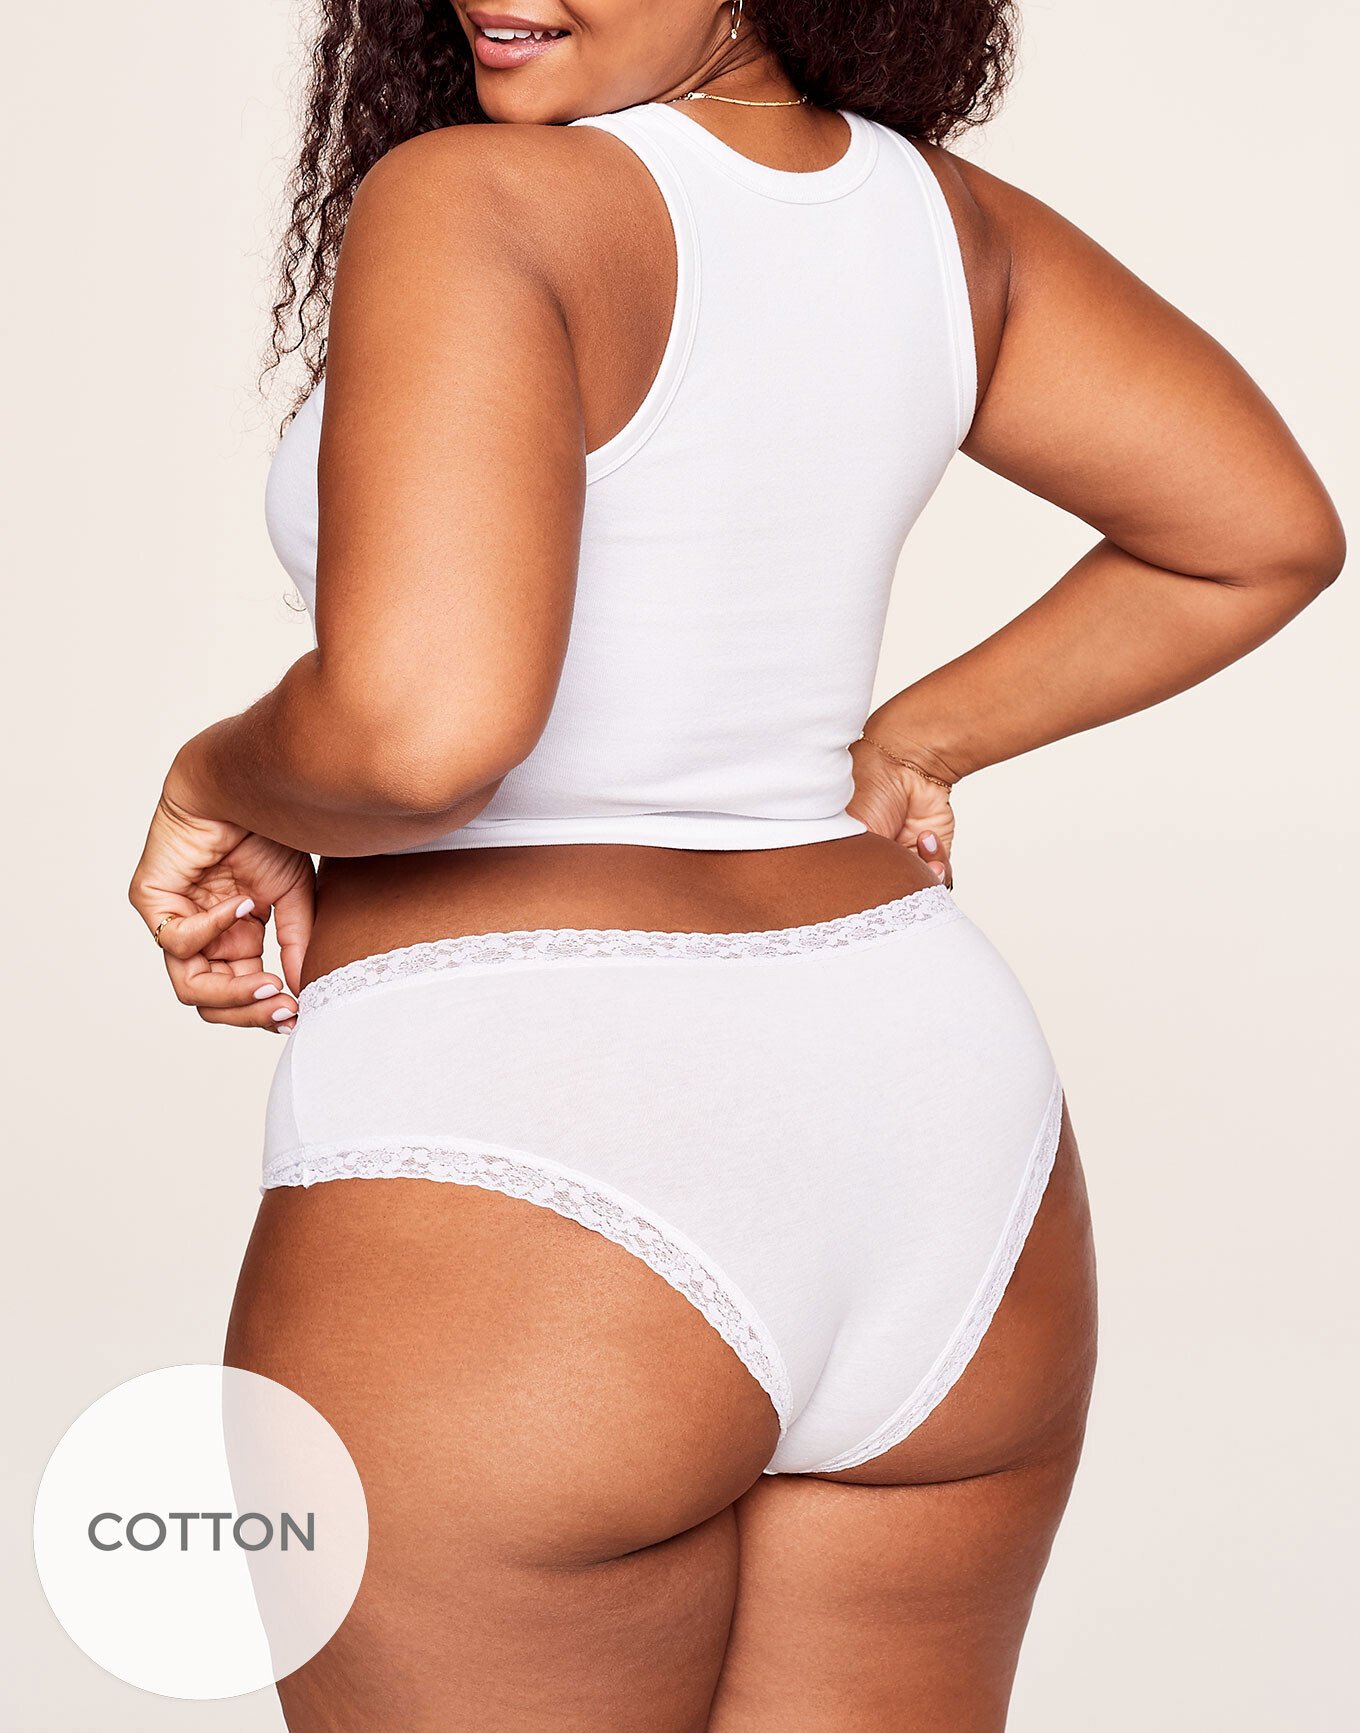 cheekybum - Cheeky Bum Lace Thong Lingerie, comfort made sexy